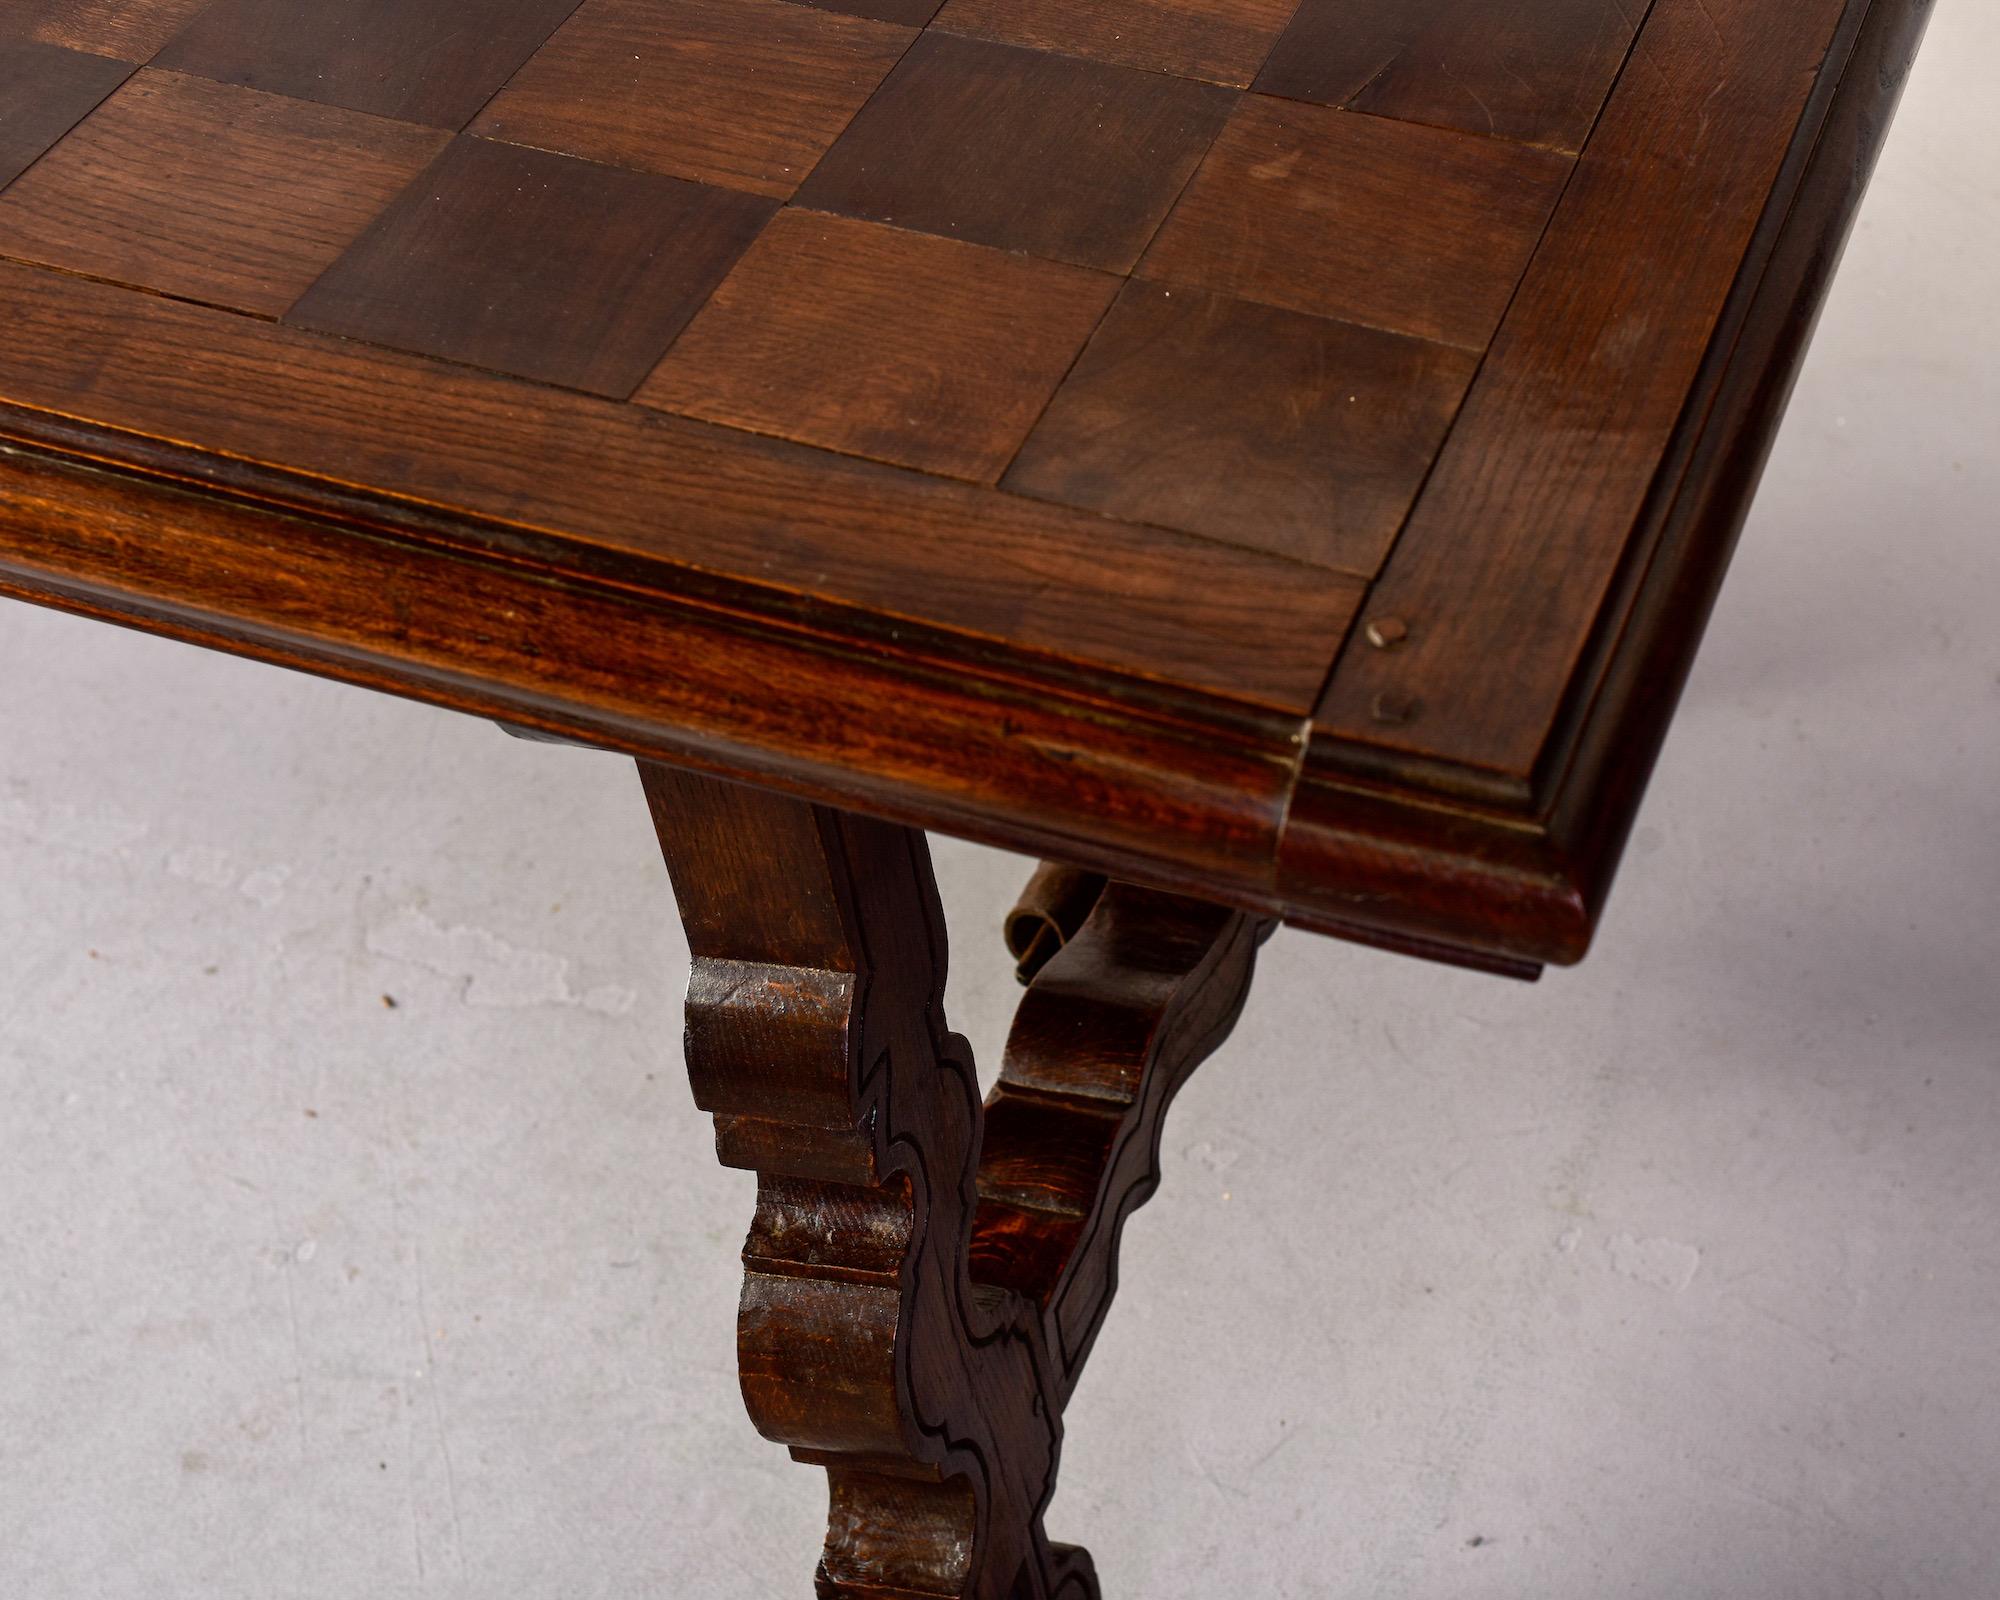 Large 19th C Spanish Walnut Table with Marquetry Top and Iron Stretcher For Sale 2